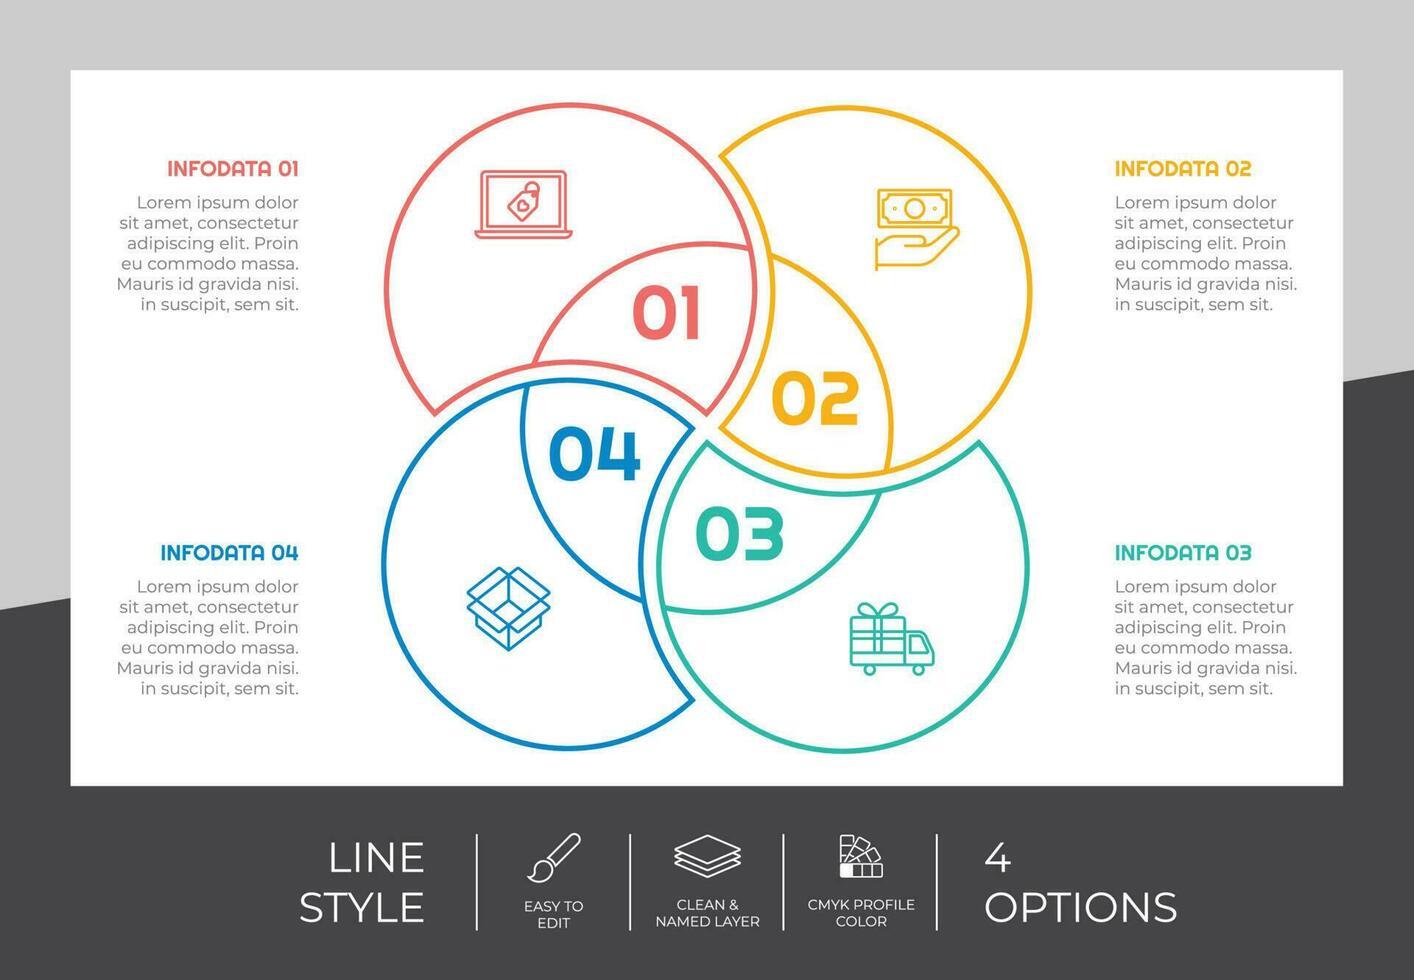 Circle option infographic vector design with 4 steps colorful style for presentation purpose.Line step infographic can be used for business and marketing